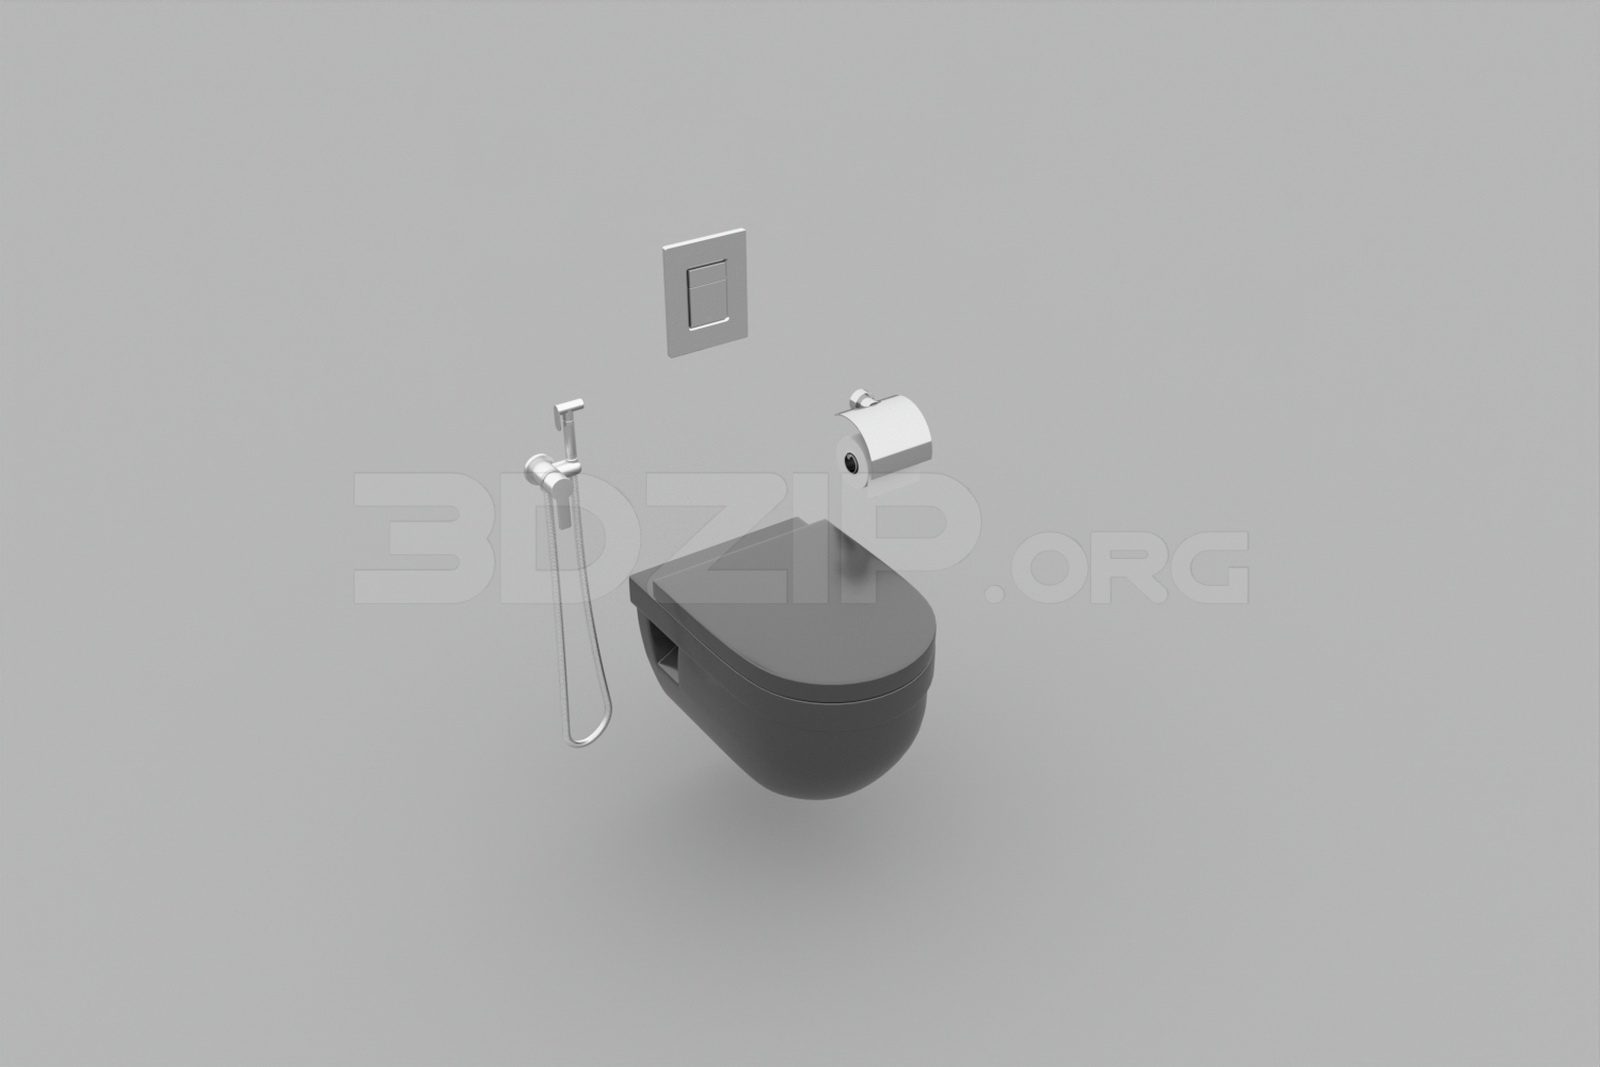 748. Download Free Toilet Model By Hieu Nguyen